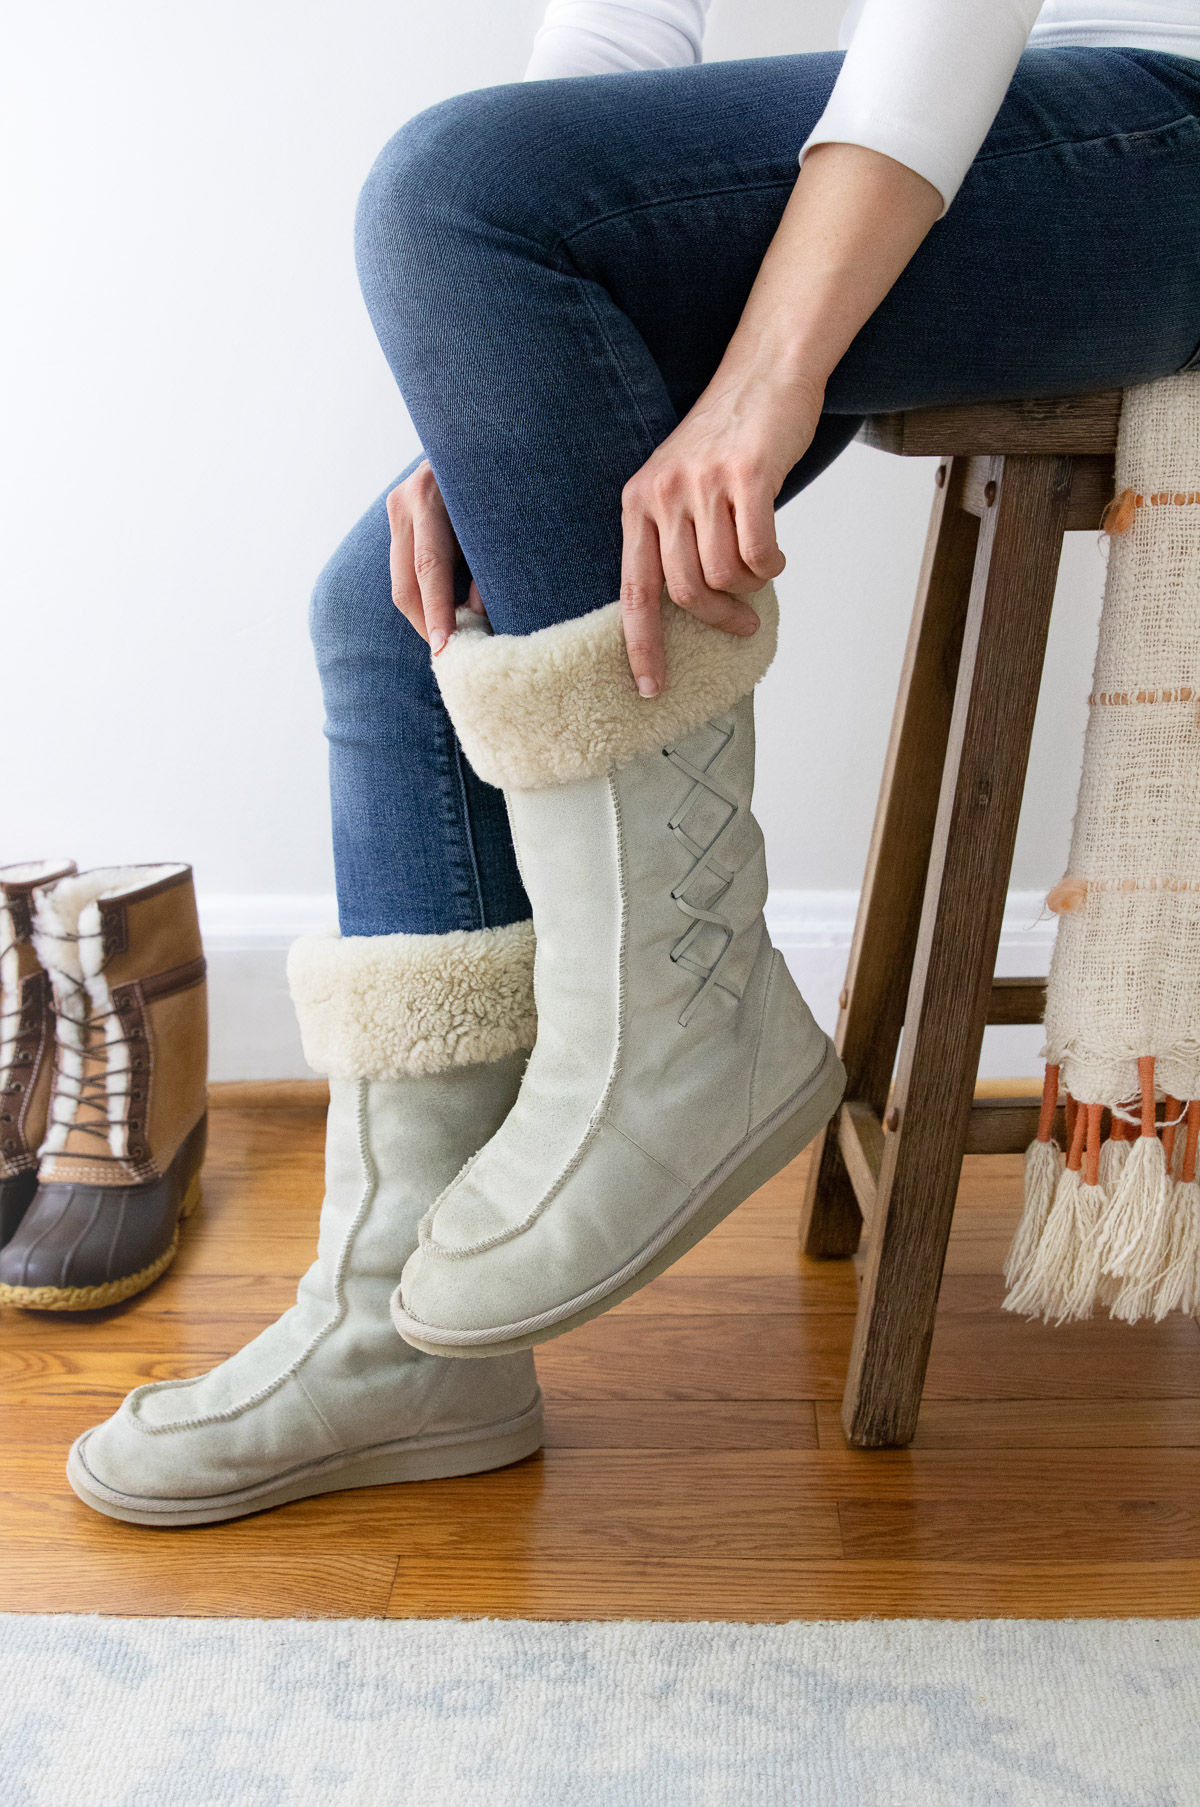 how to clean suede boots